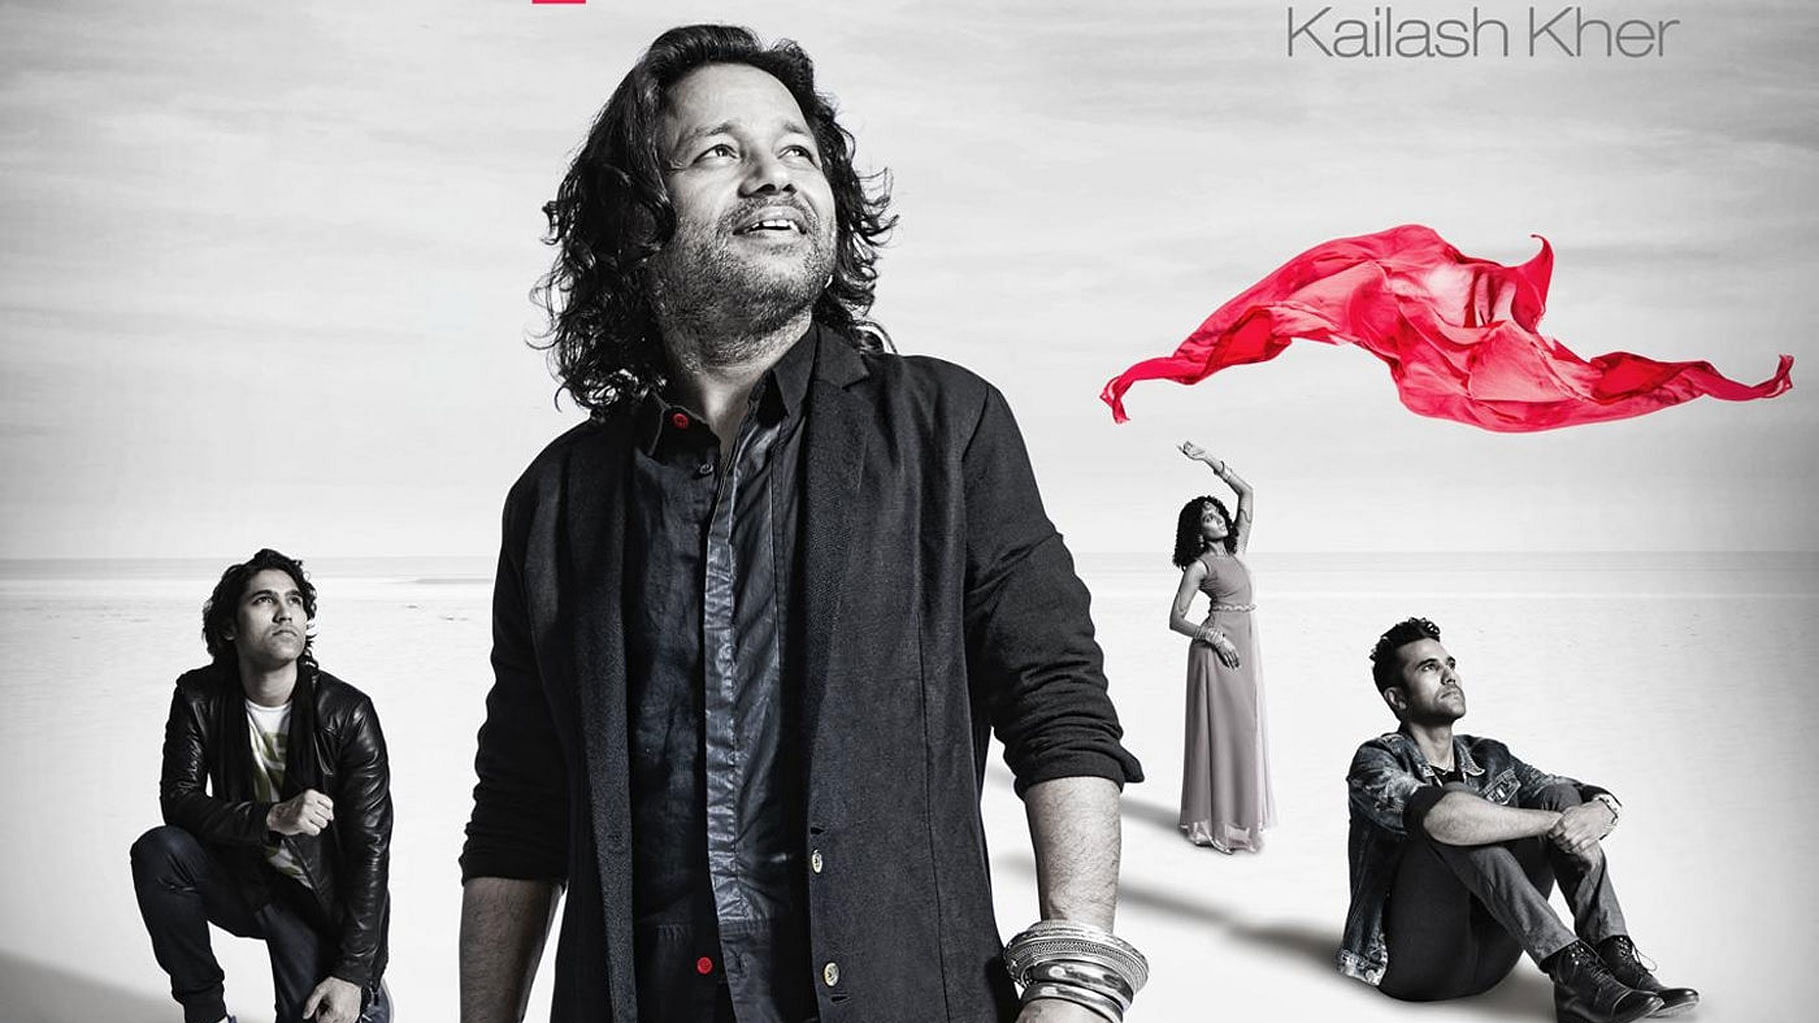 Kailash Kher’s new album is a confused fusion of the earthy and the electro